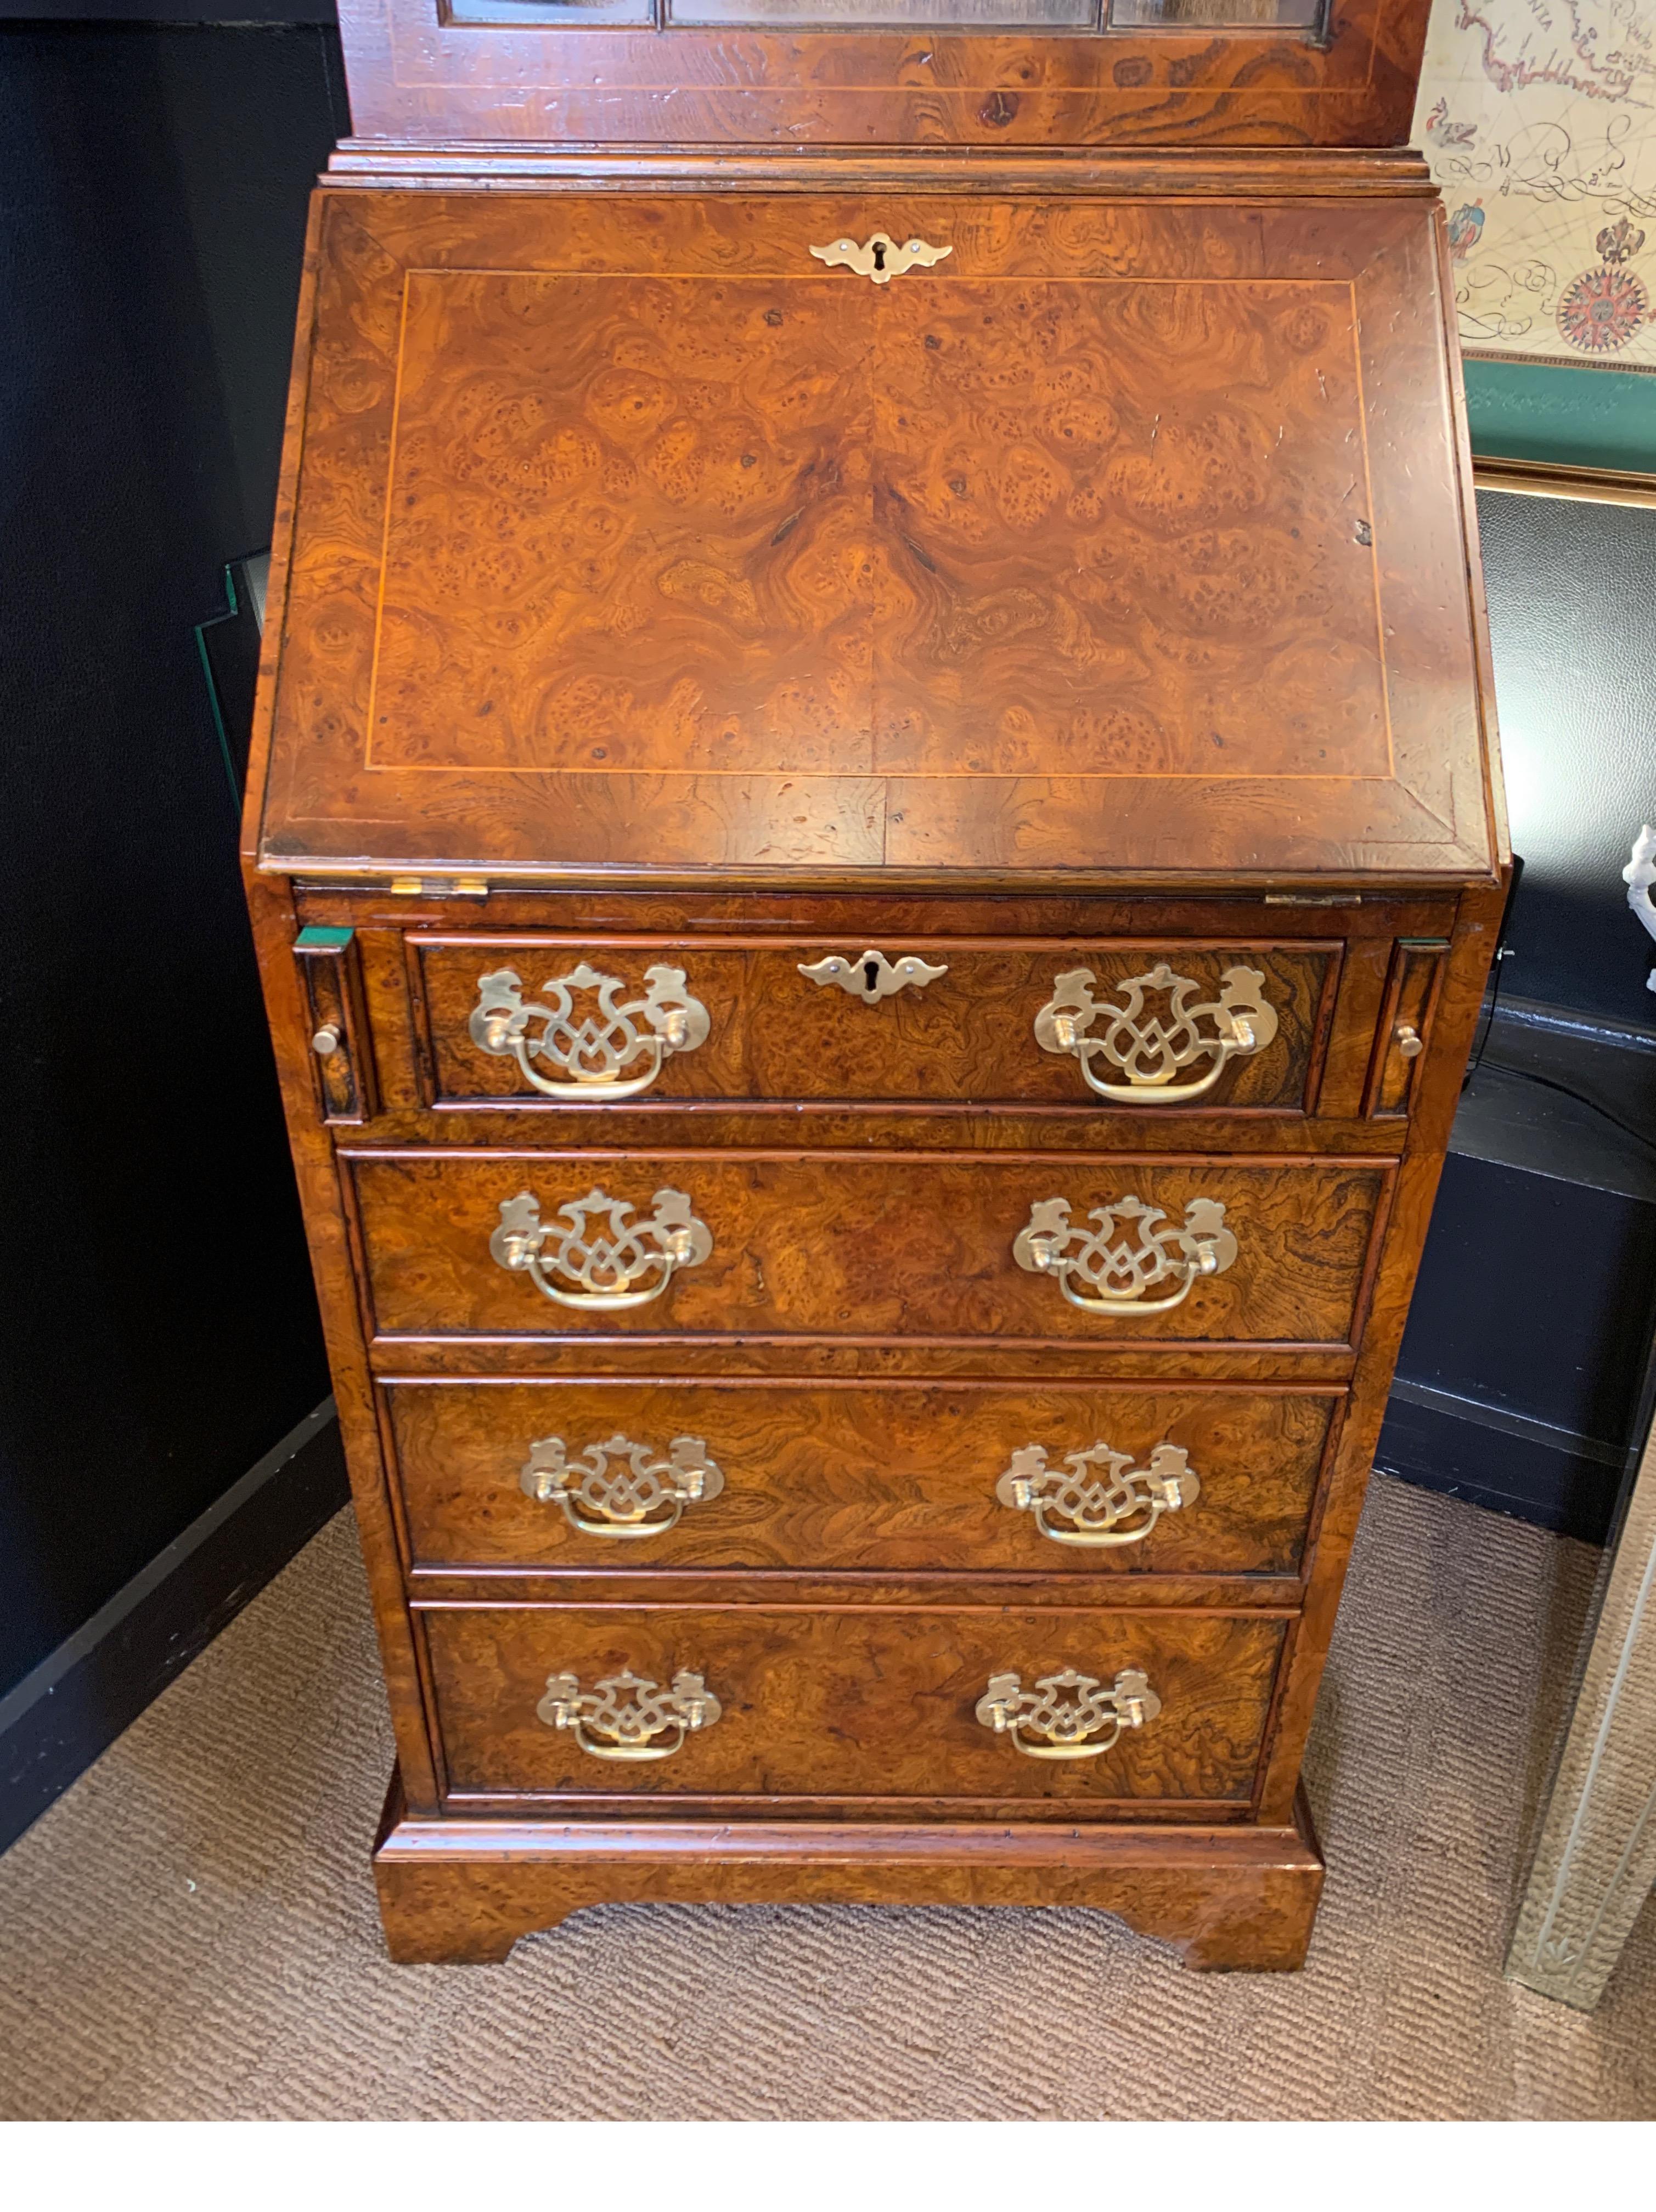 A classic Chippendale style burl walnut secretary desk with bookcase top and fall front desk base. The solid brass pierced hardware with leather interior.